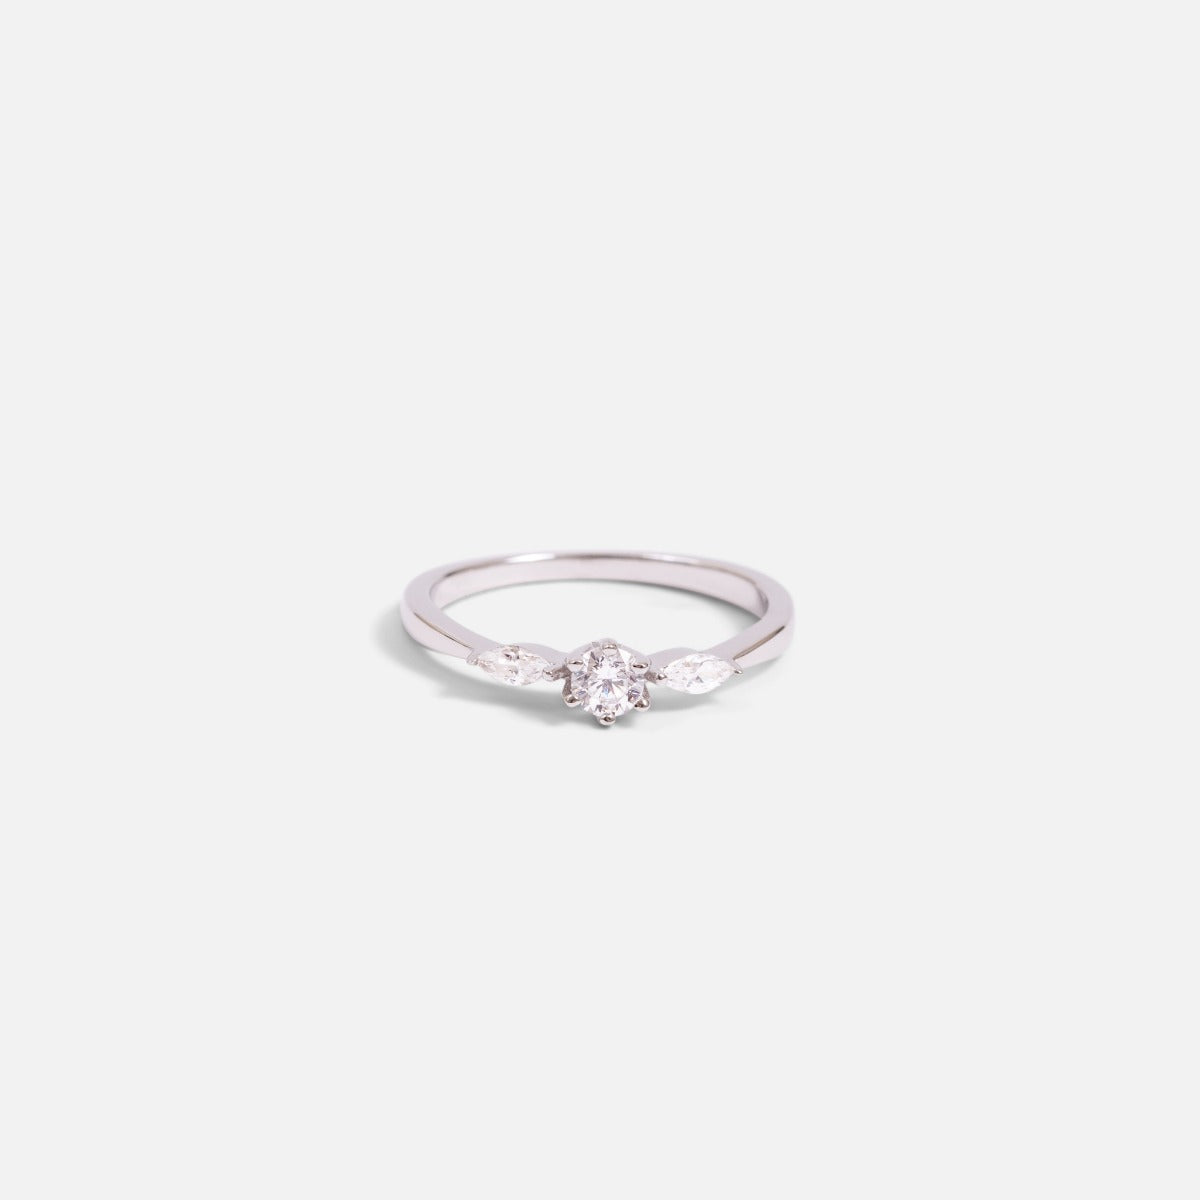 Thin sterling silver ring with small cubic zirconia